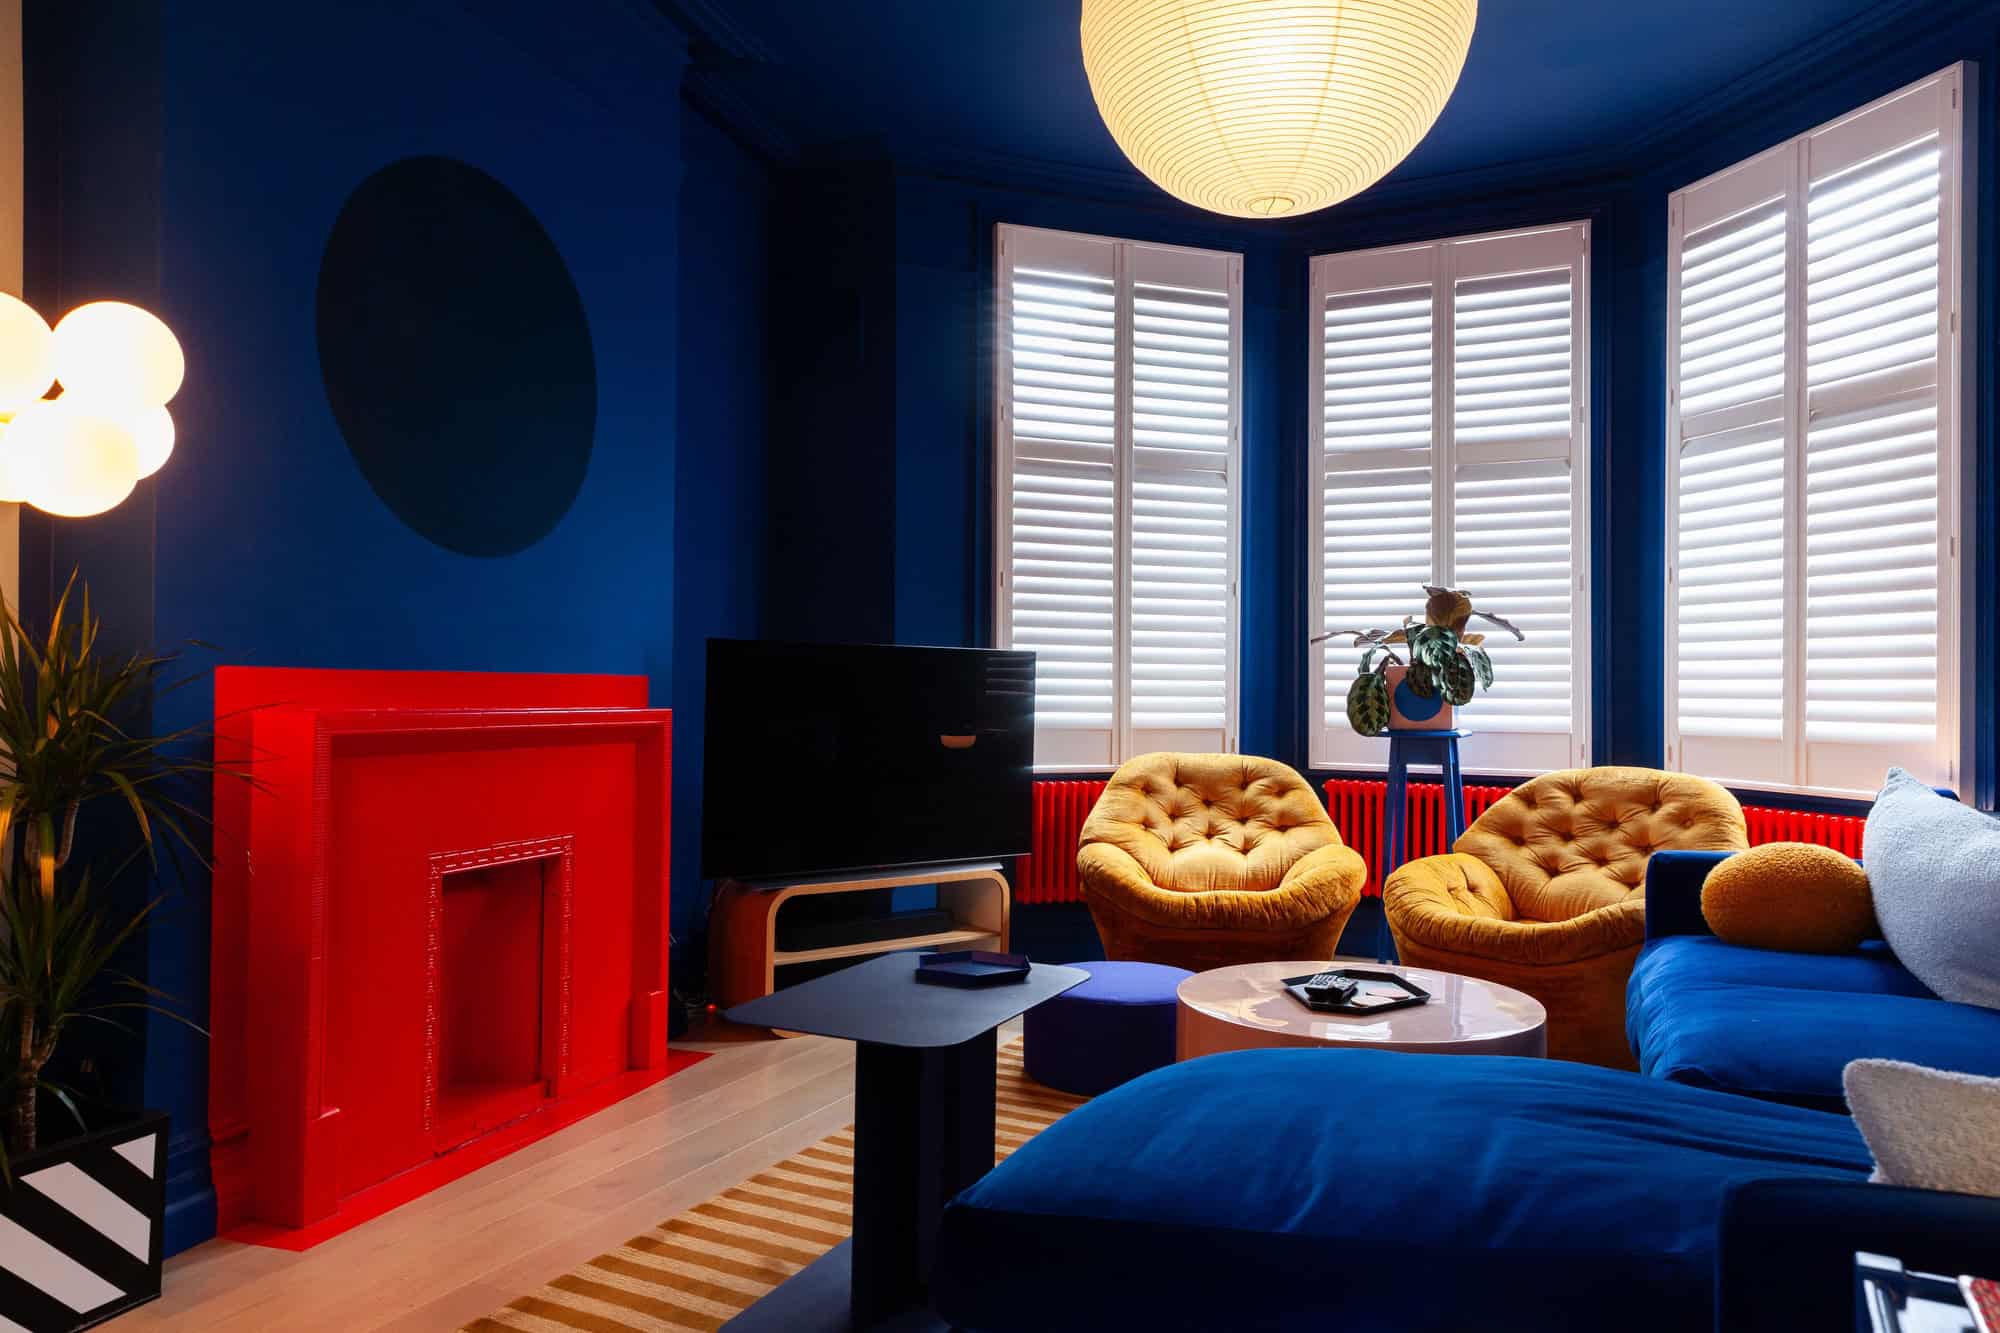 Hewitt N8 - A super colourful interior hidden within a Victorian semi-detached home in East London - The Location Guys